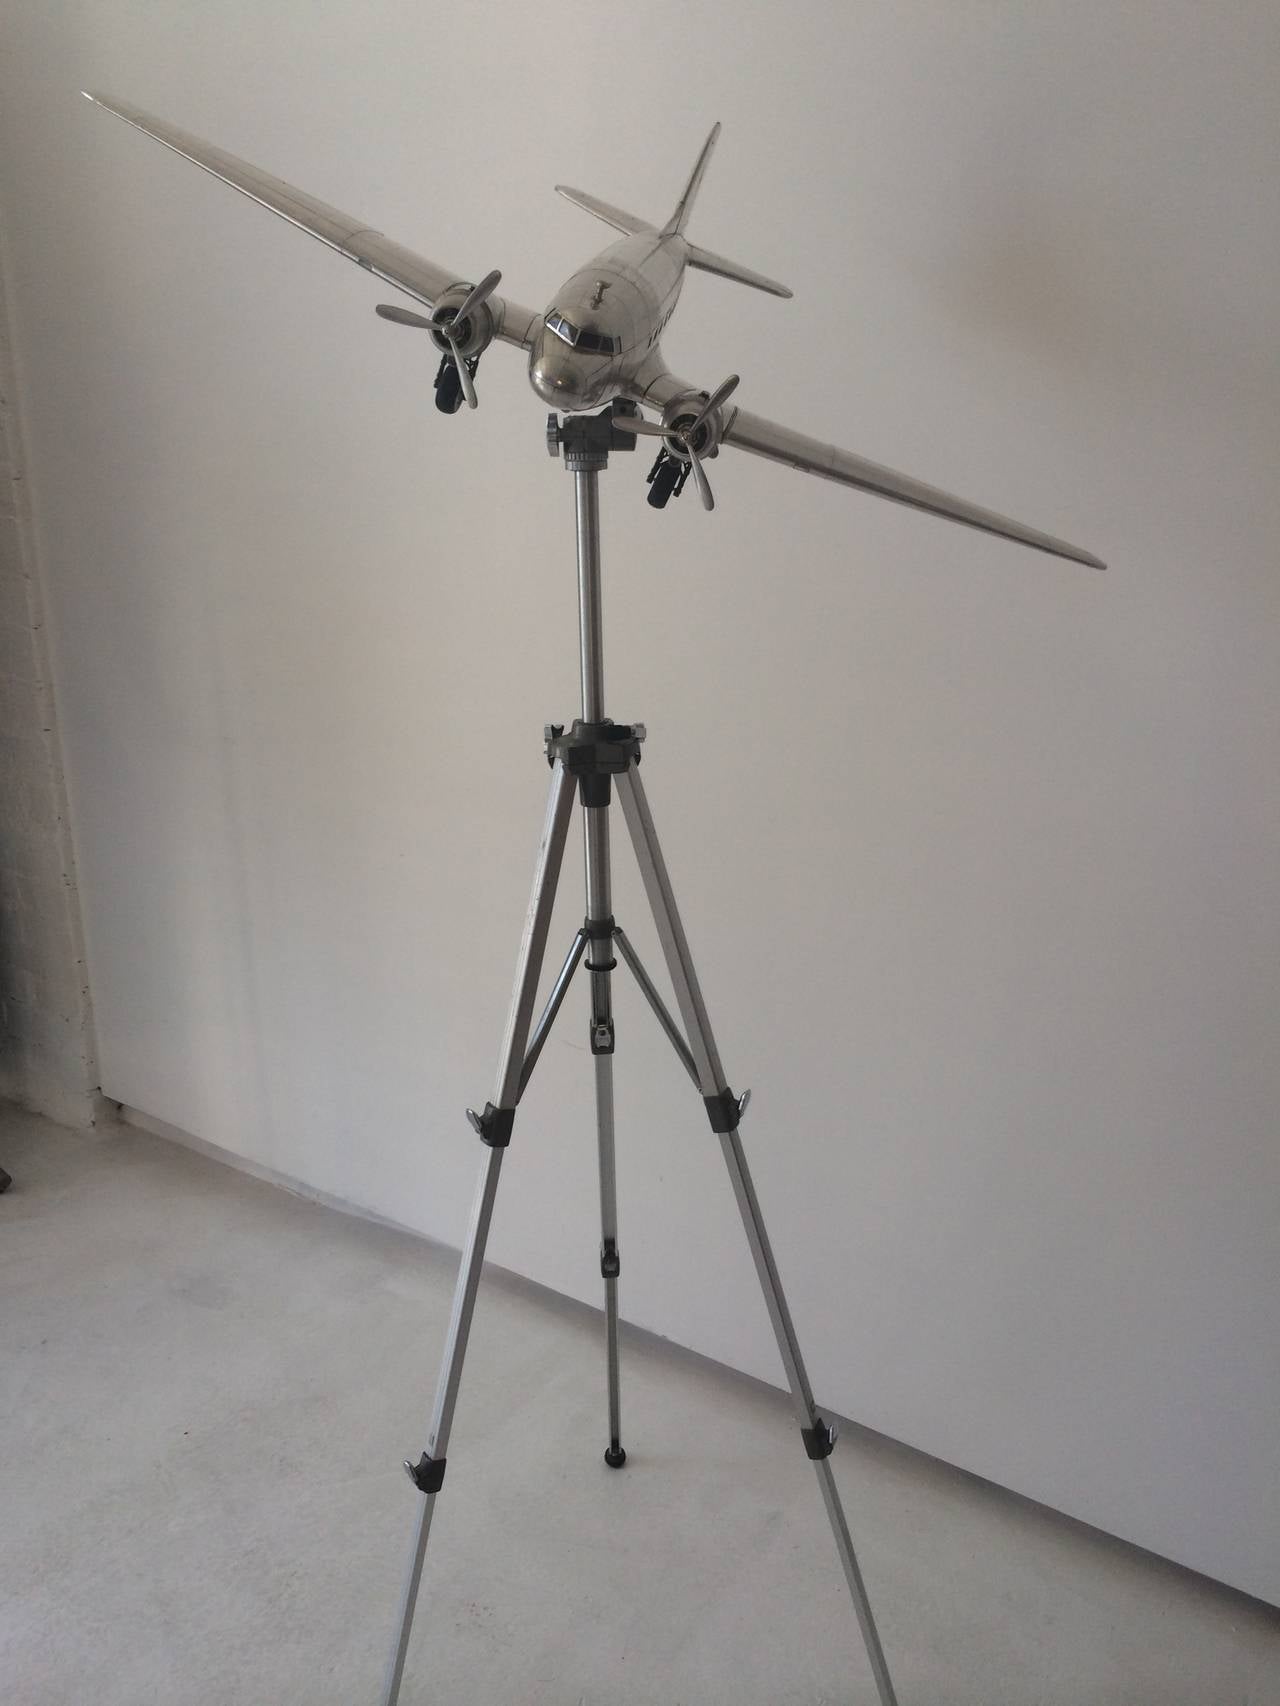 Beautiful 1980s DC-3 airplane scale model, aluminum, with 1940s tripod.
The tripod can be adjusted at the swivel and in height up to approximately 70 inches.